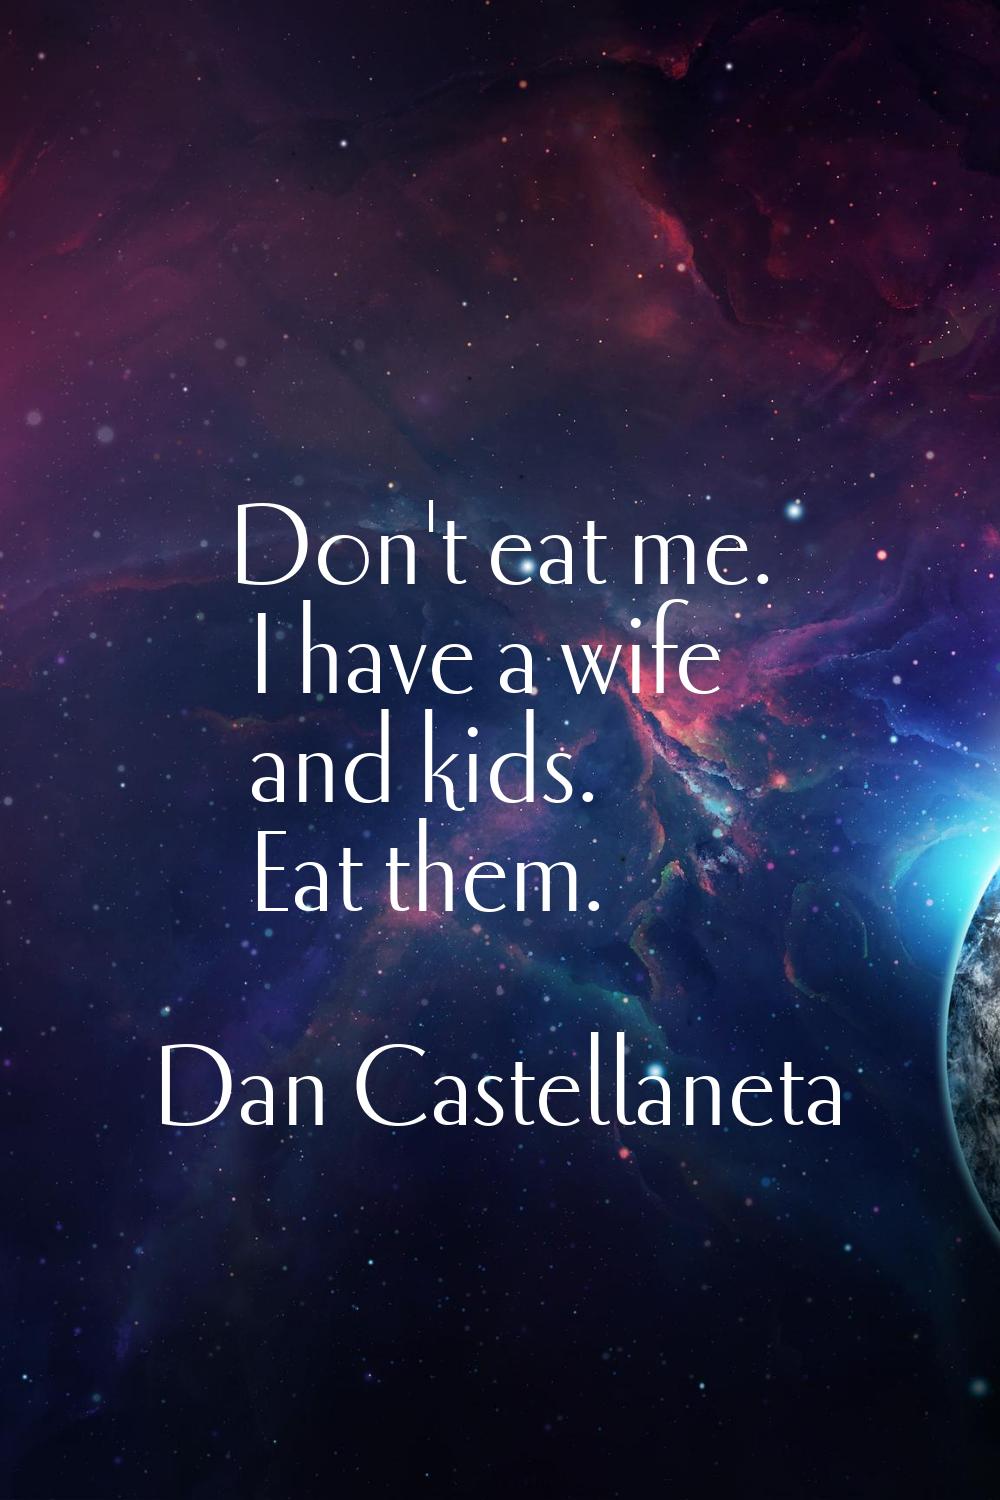 Don't eat me. I have a wife and kids. Eat them.